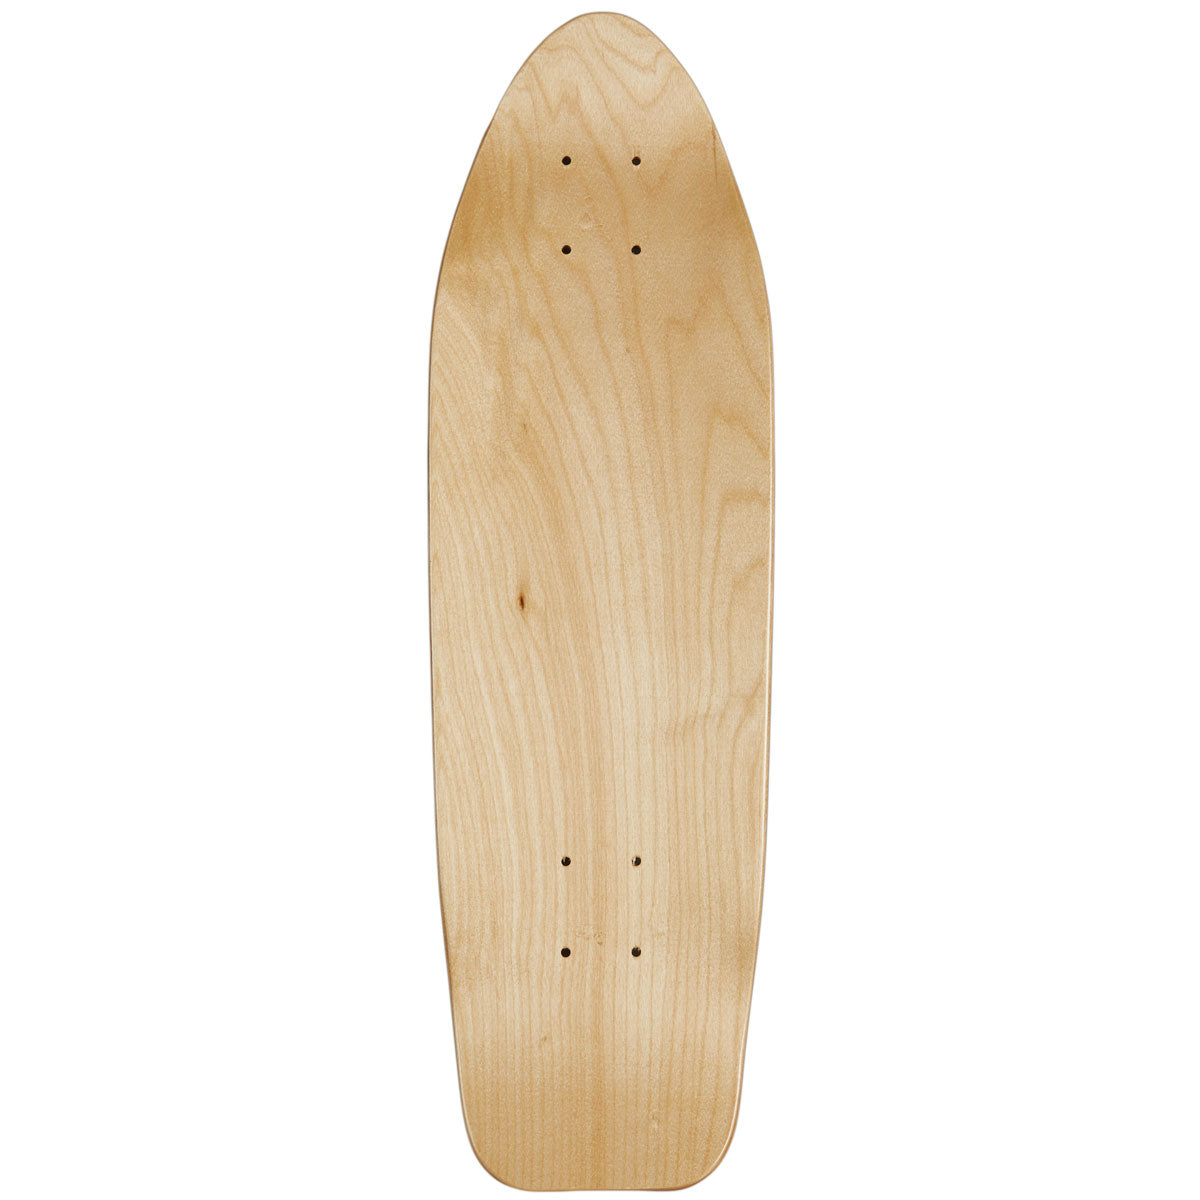 Rout Plume Cruiser Skateboard Complete image 2